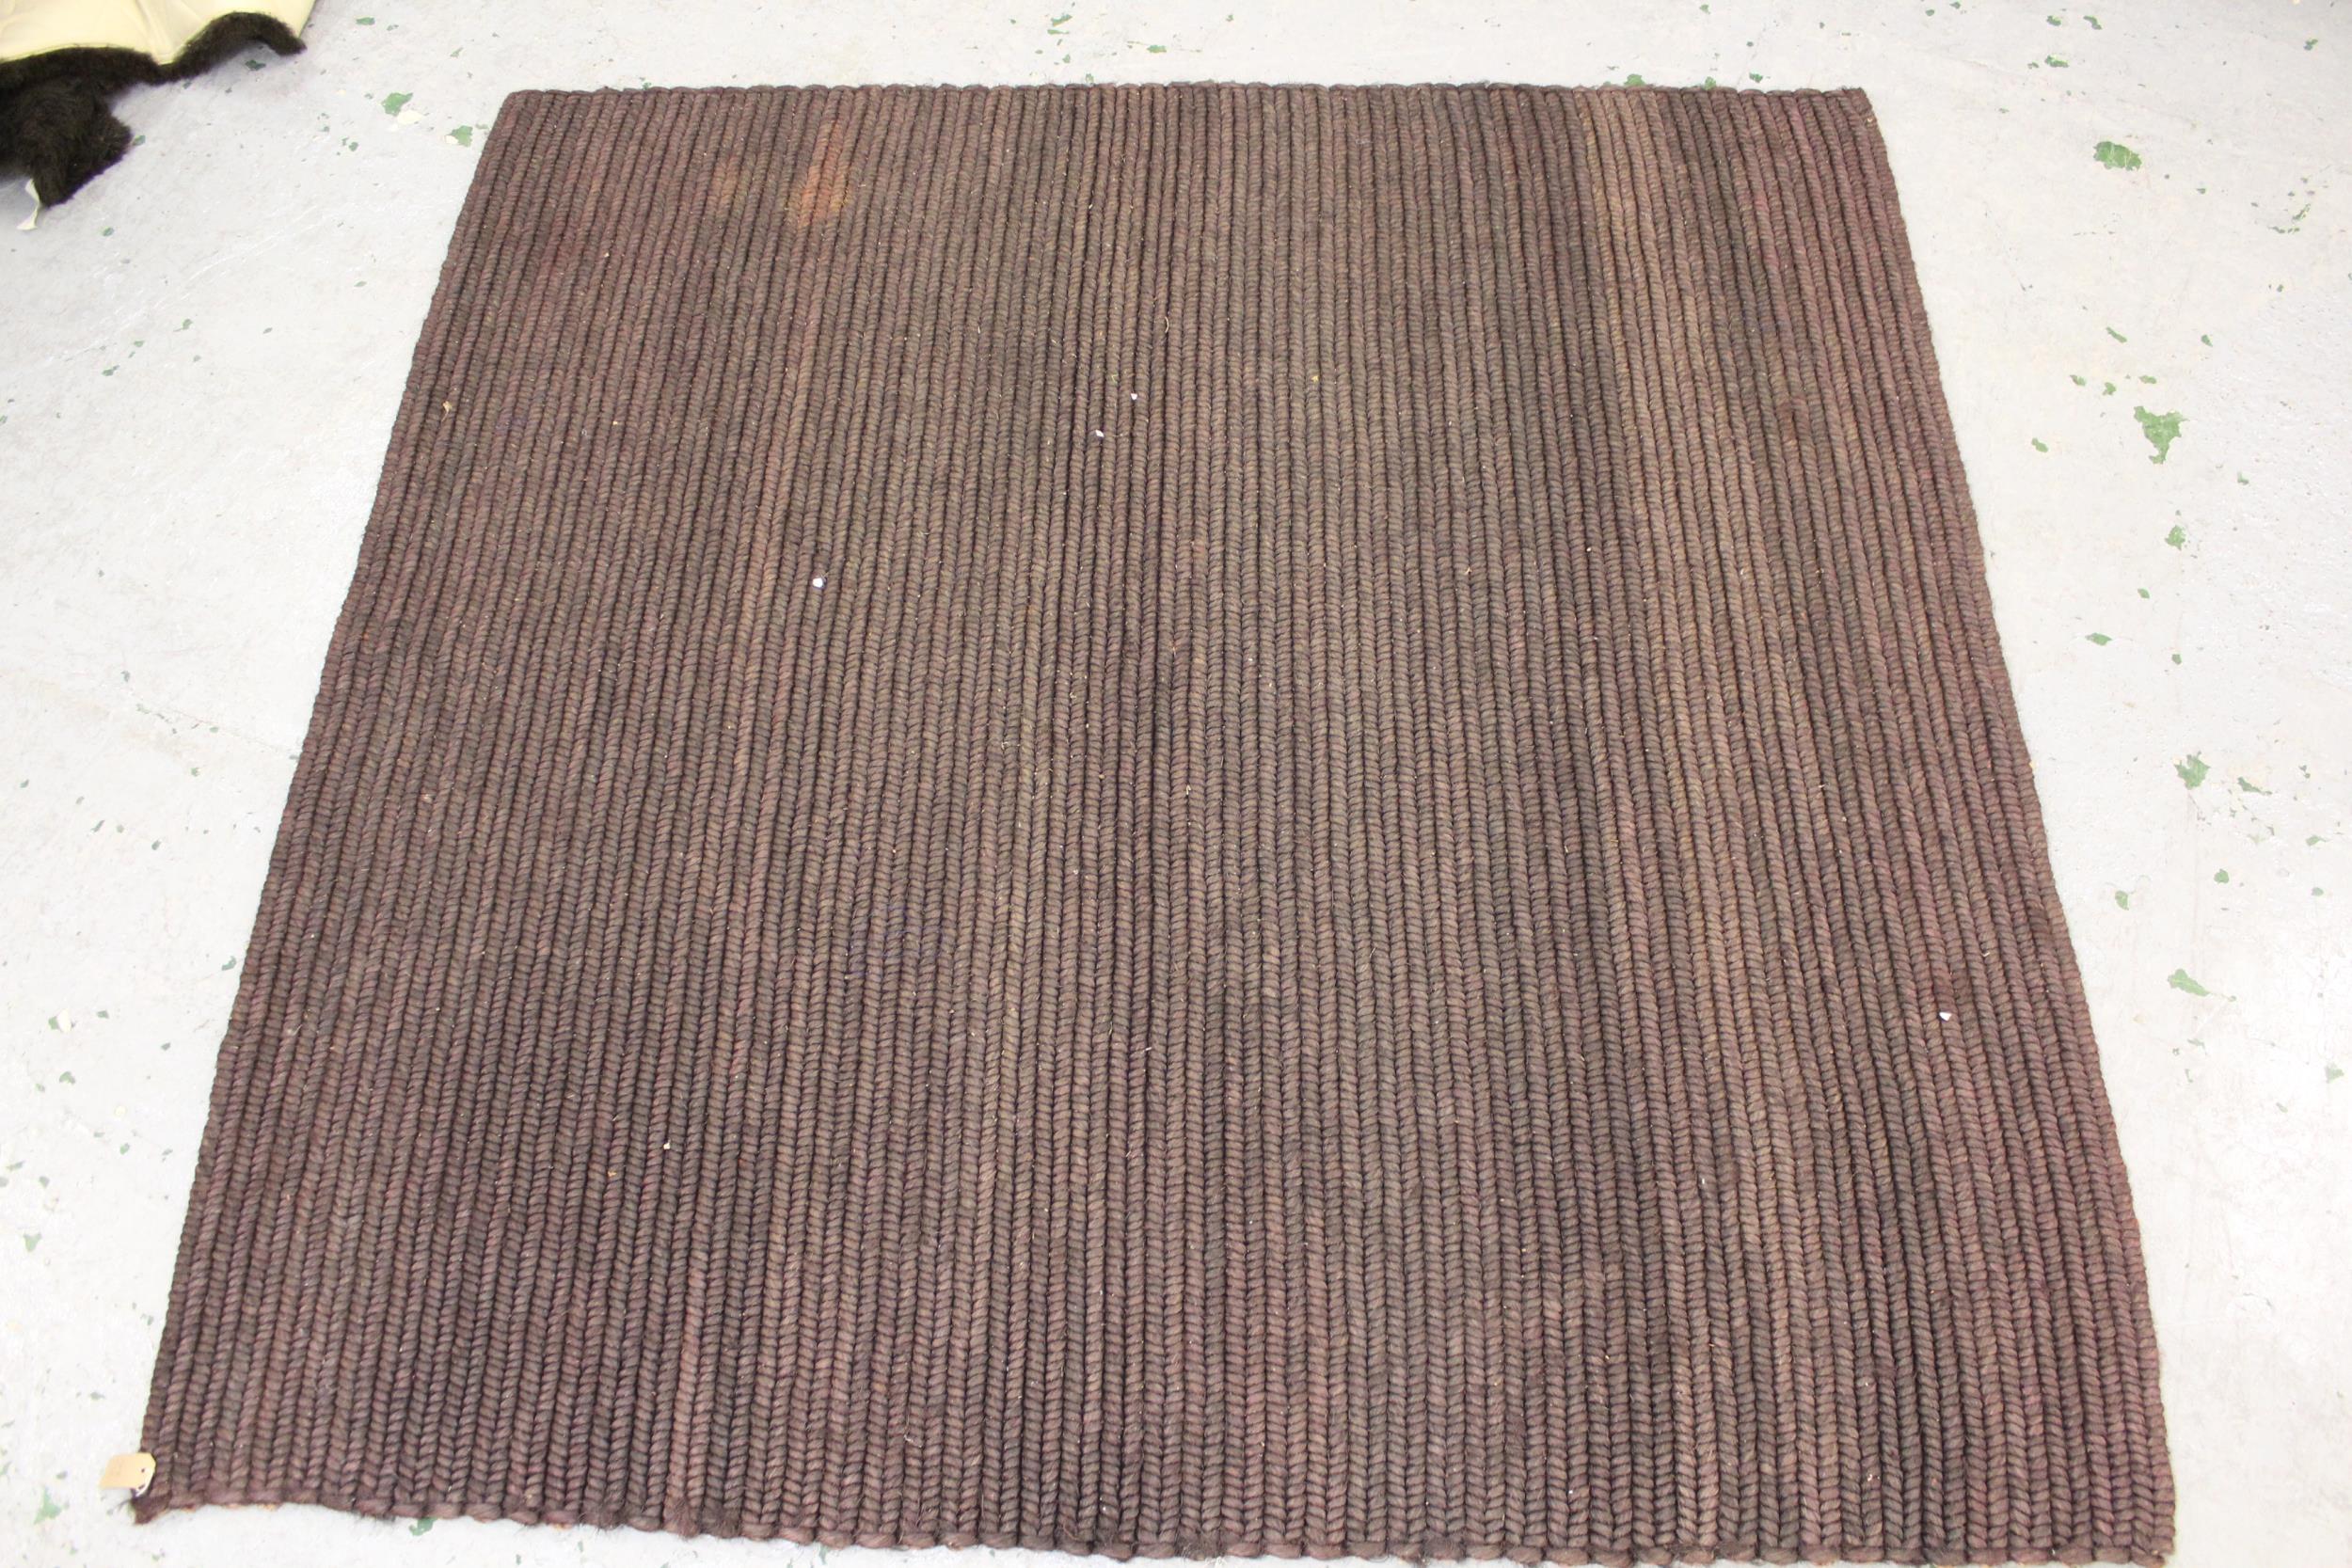 Flat woven coir rug, 7ft square approximately together with a dark brown sheepskin rug and a Chinese